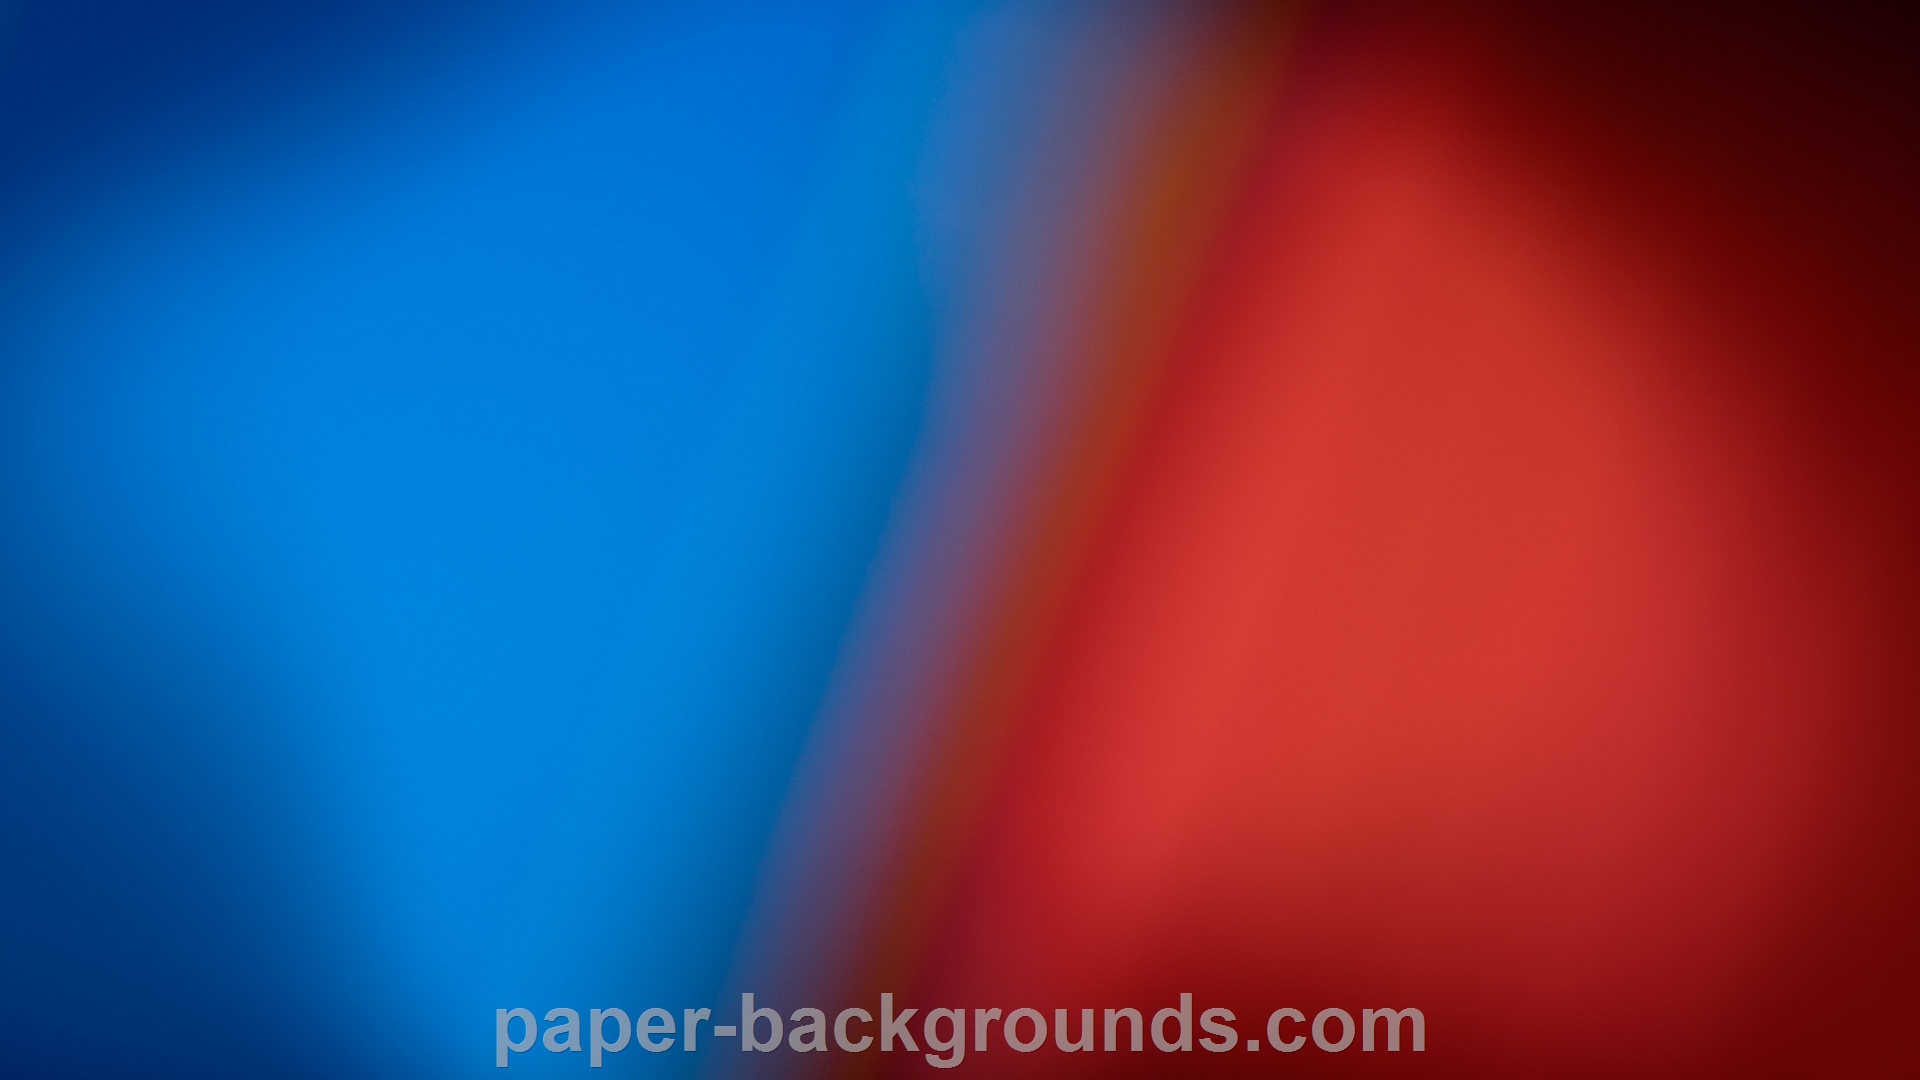 Free Download Wallpaper Abstract Background Red Blue Backgrounds Textureimages 1920x1080 For